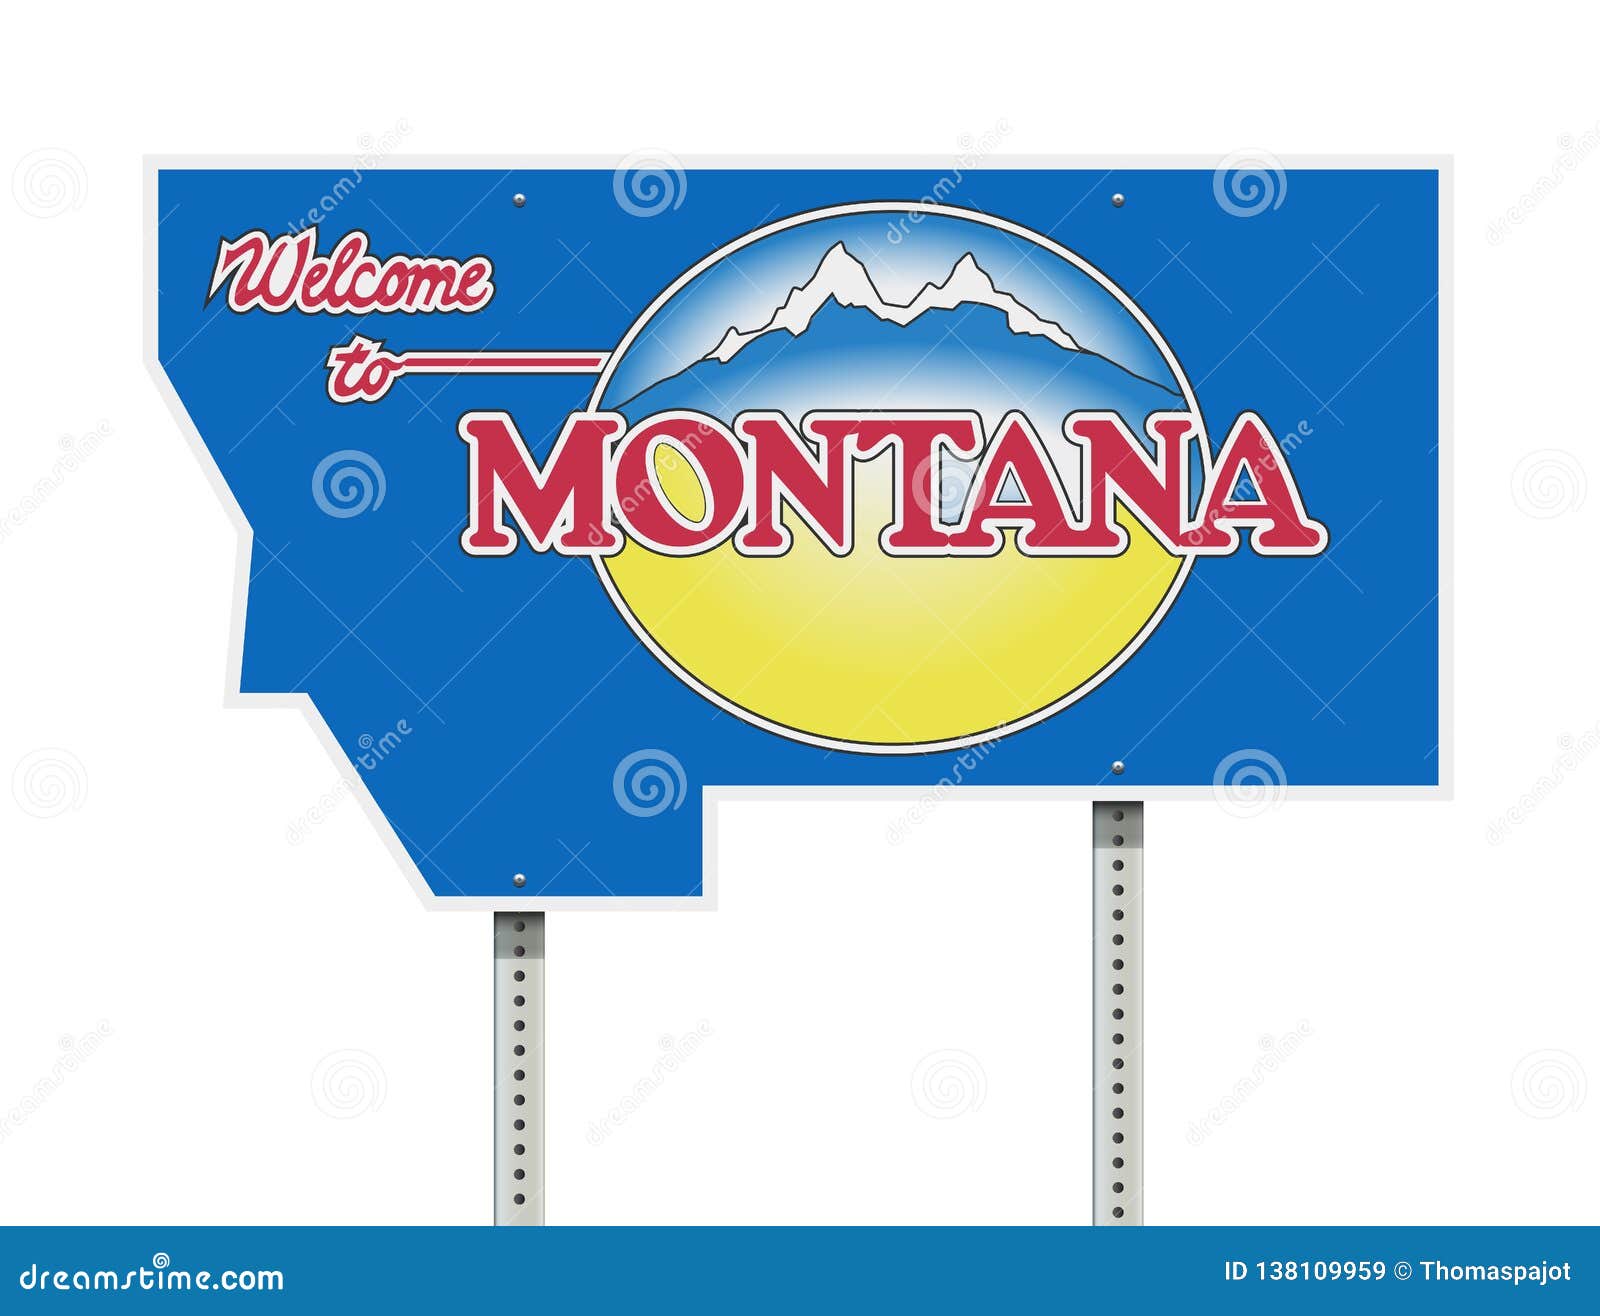 Welcome To Montana Road Sign Stock Vector Illustration Of States